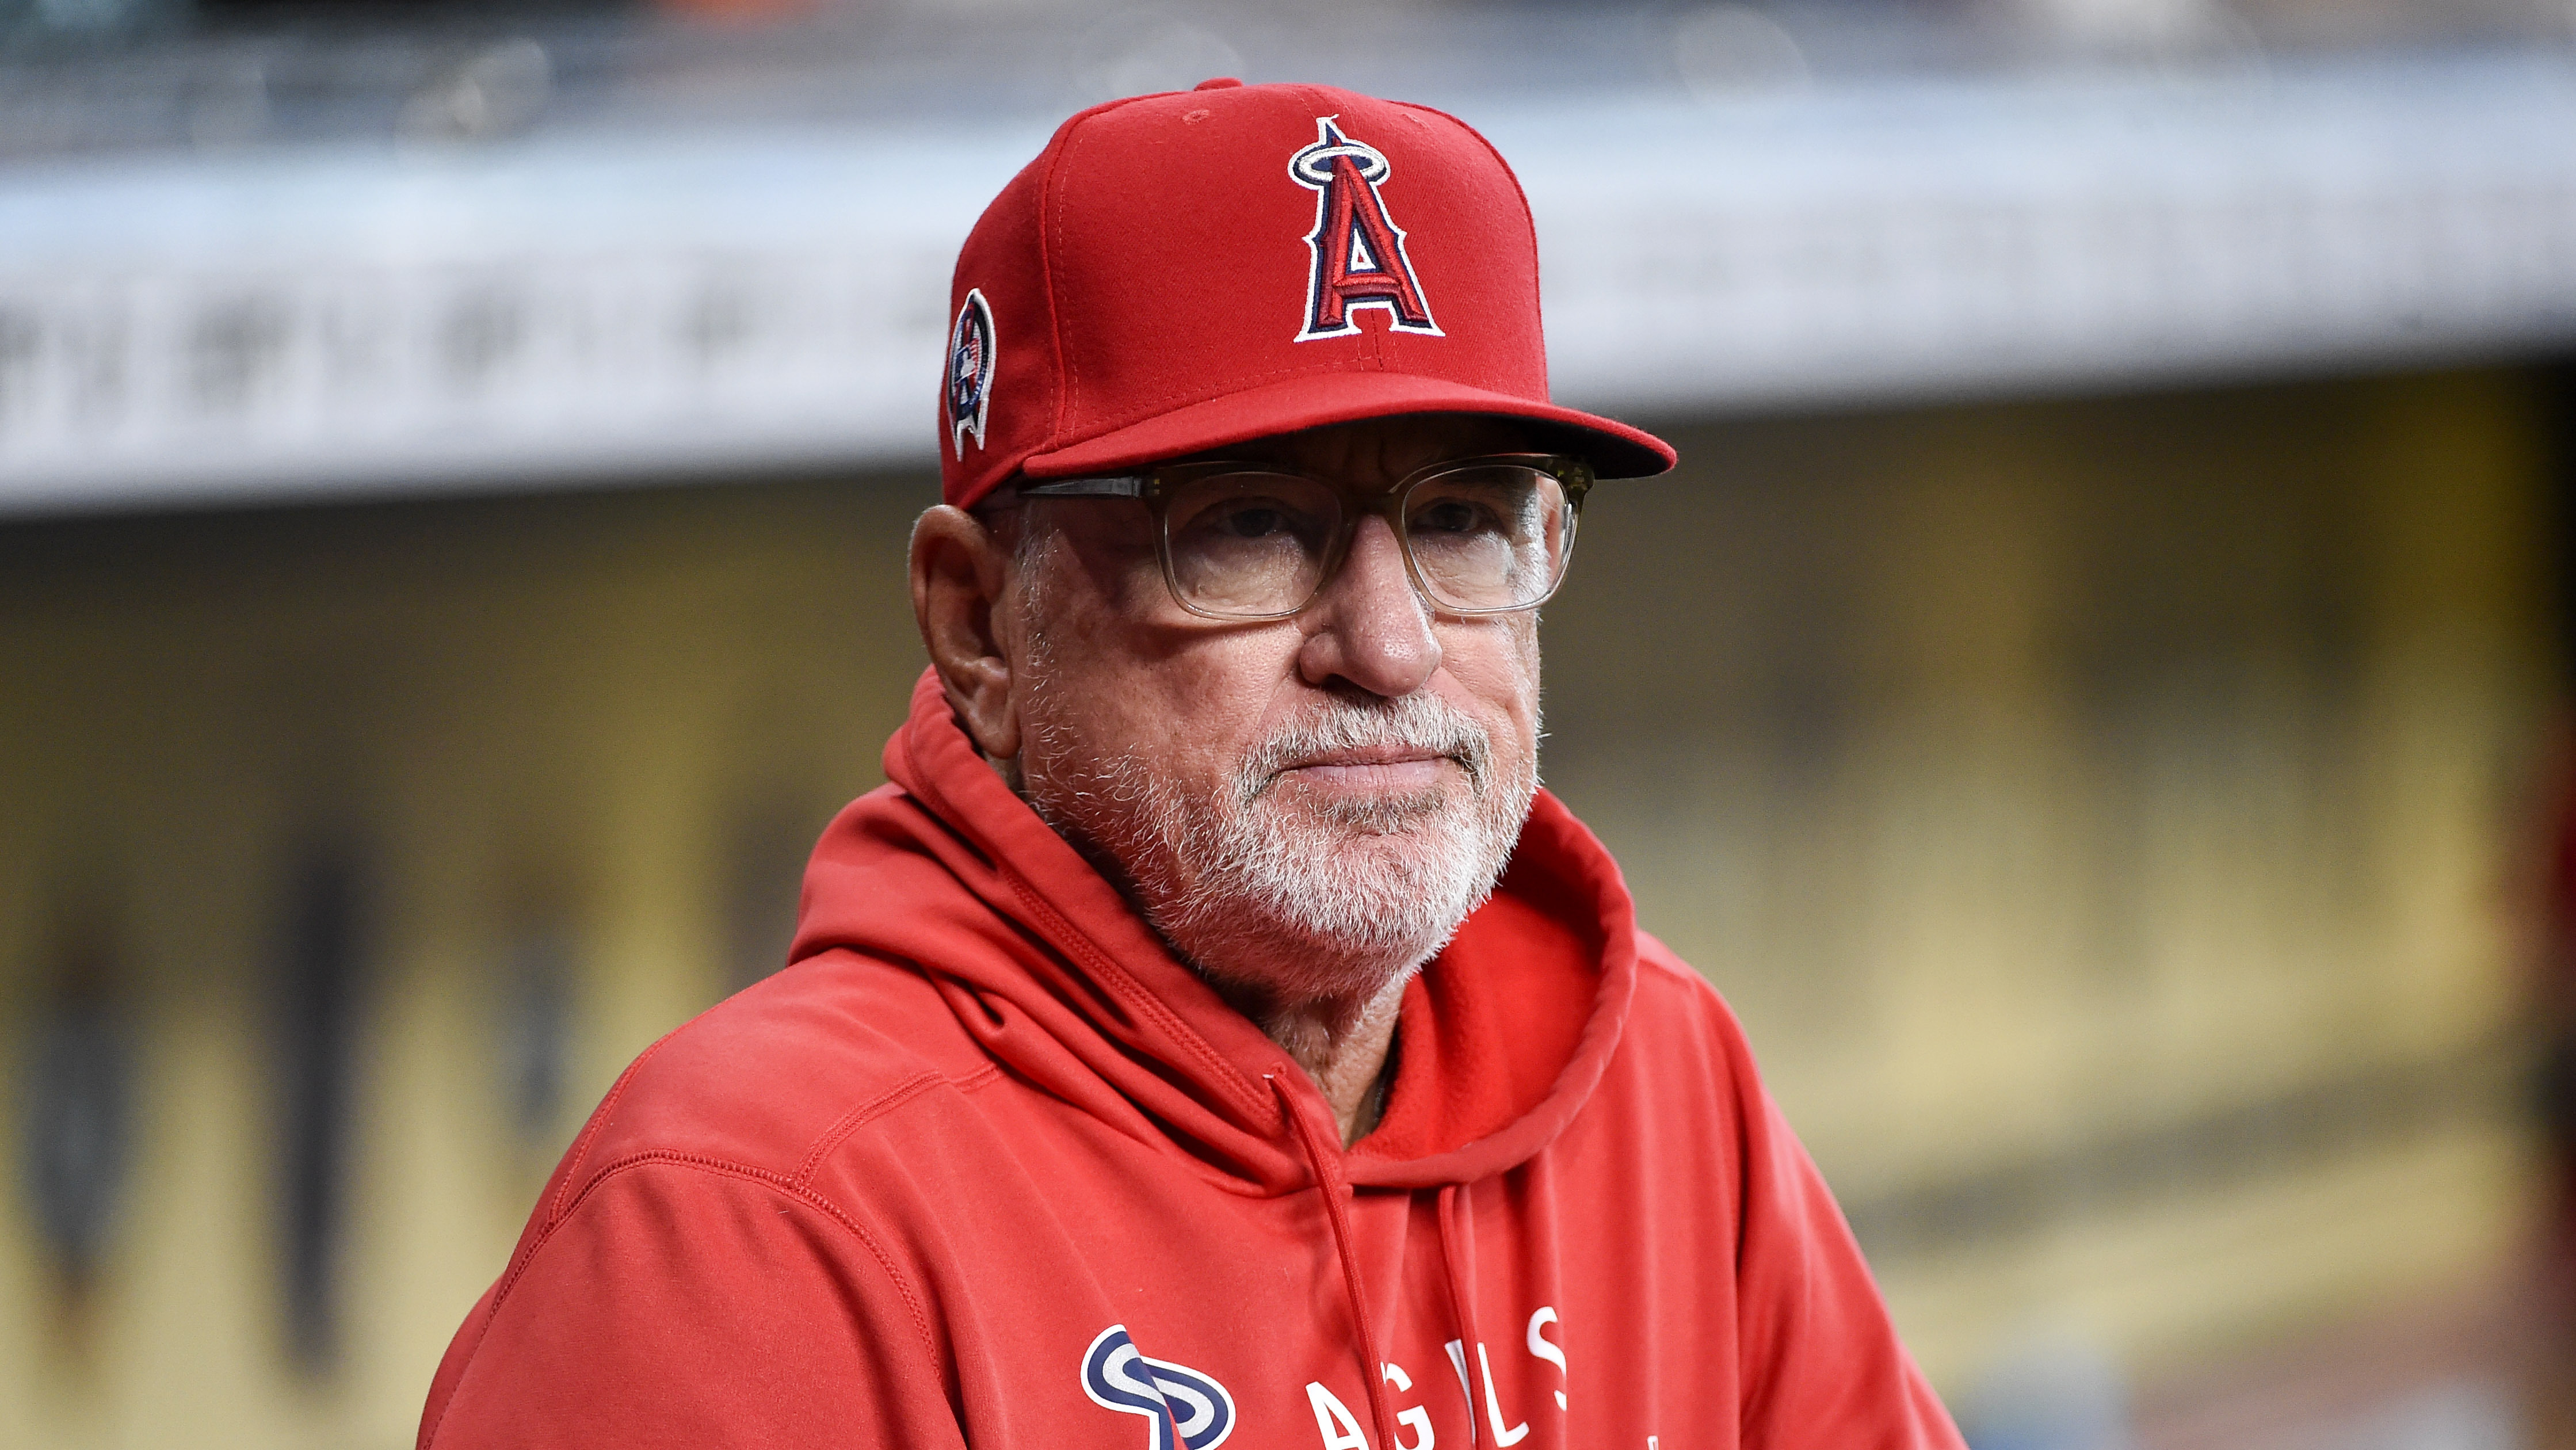 Angels’ Joe Maddon Explains Intentionally Walking Corey Seager With Bases Loaded